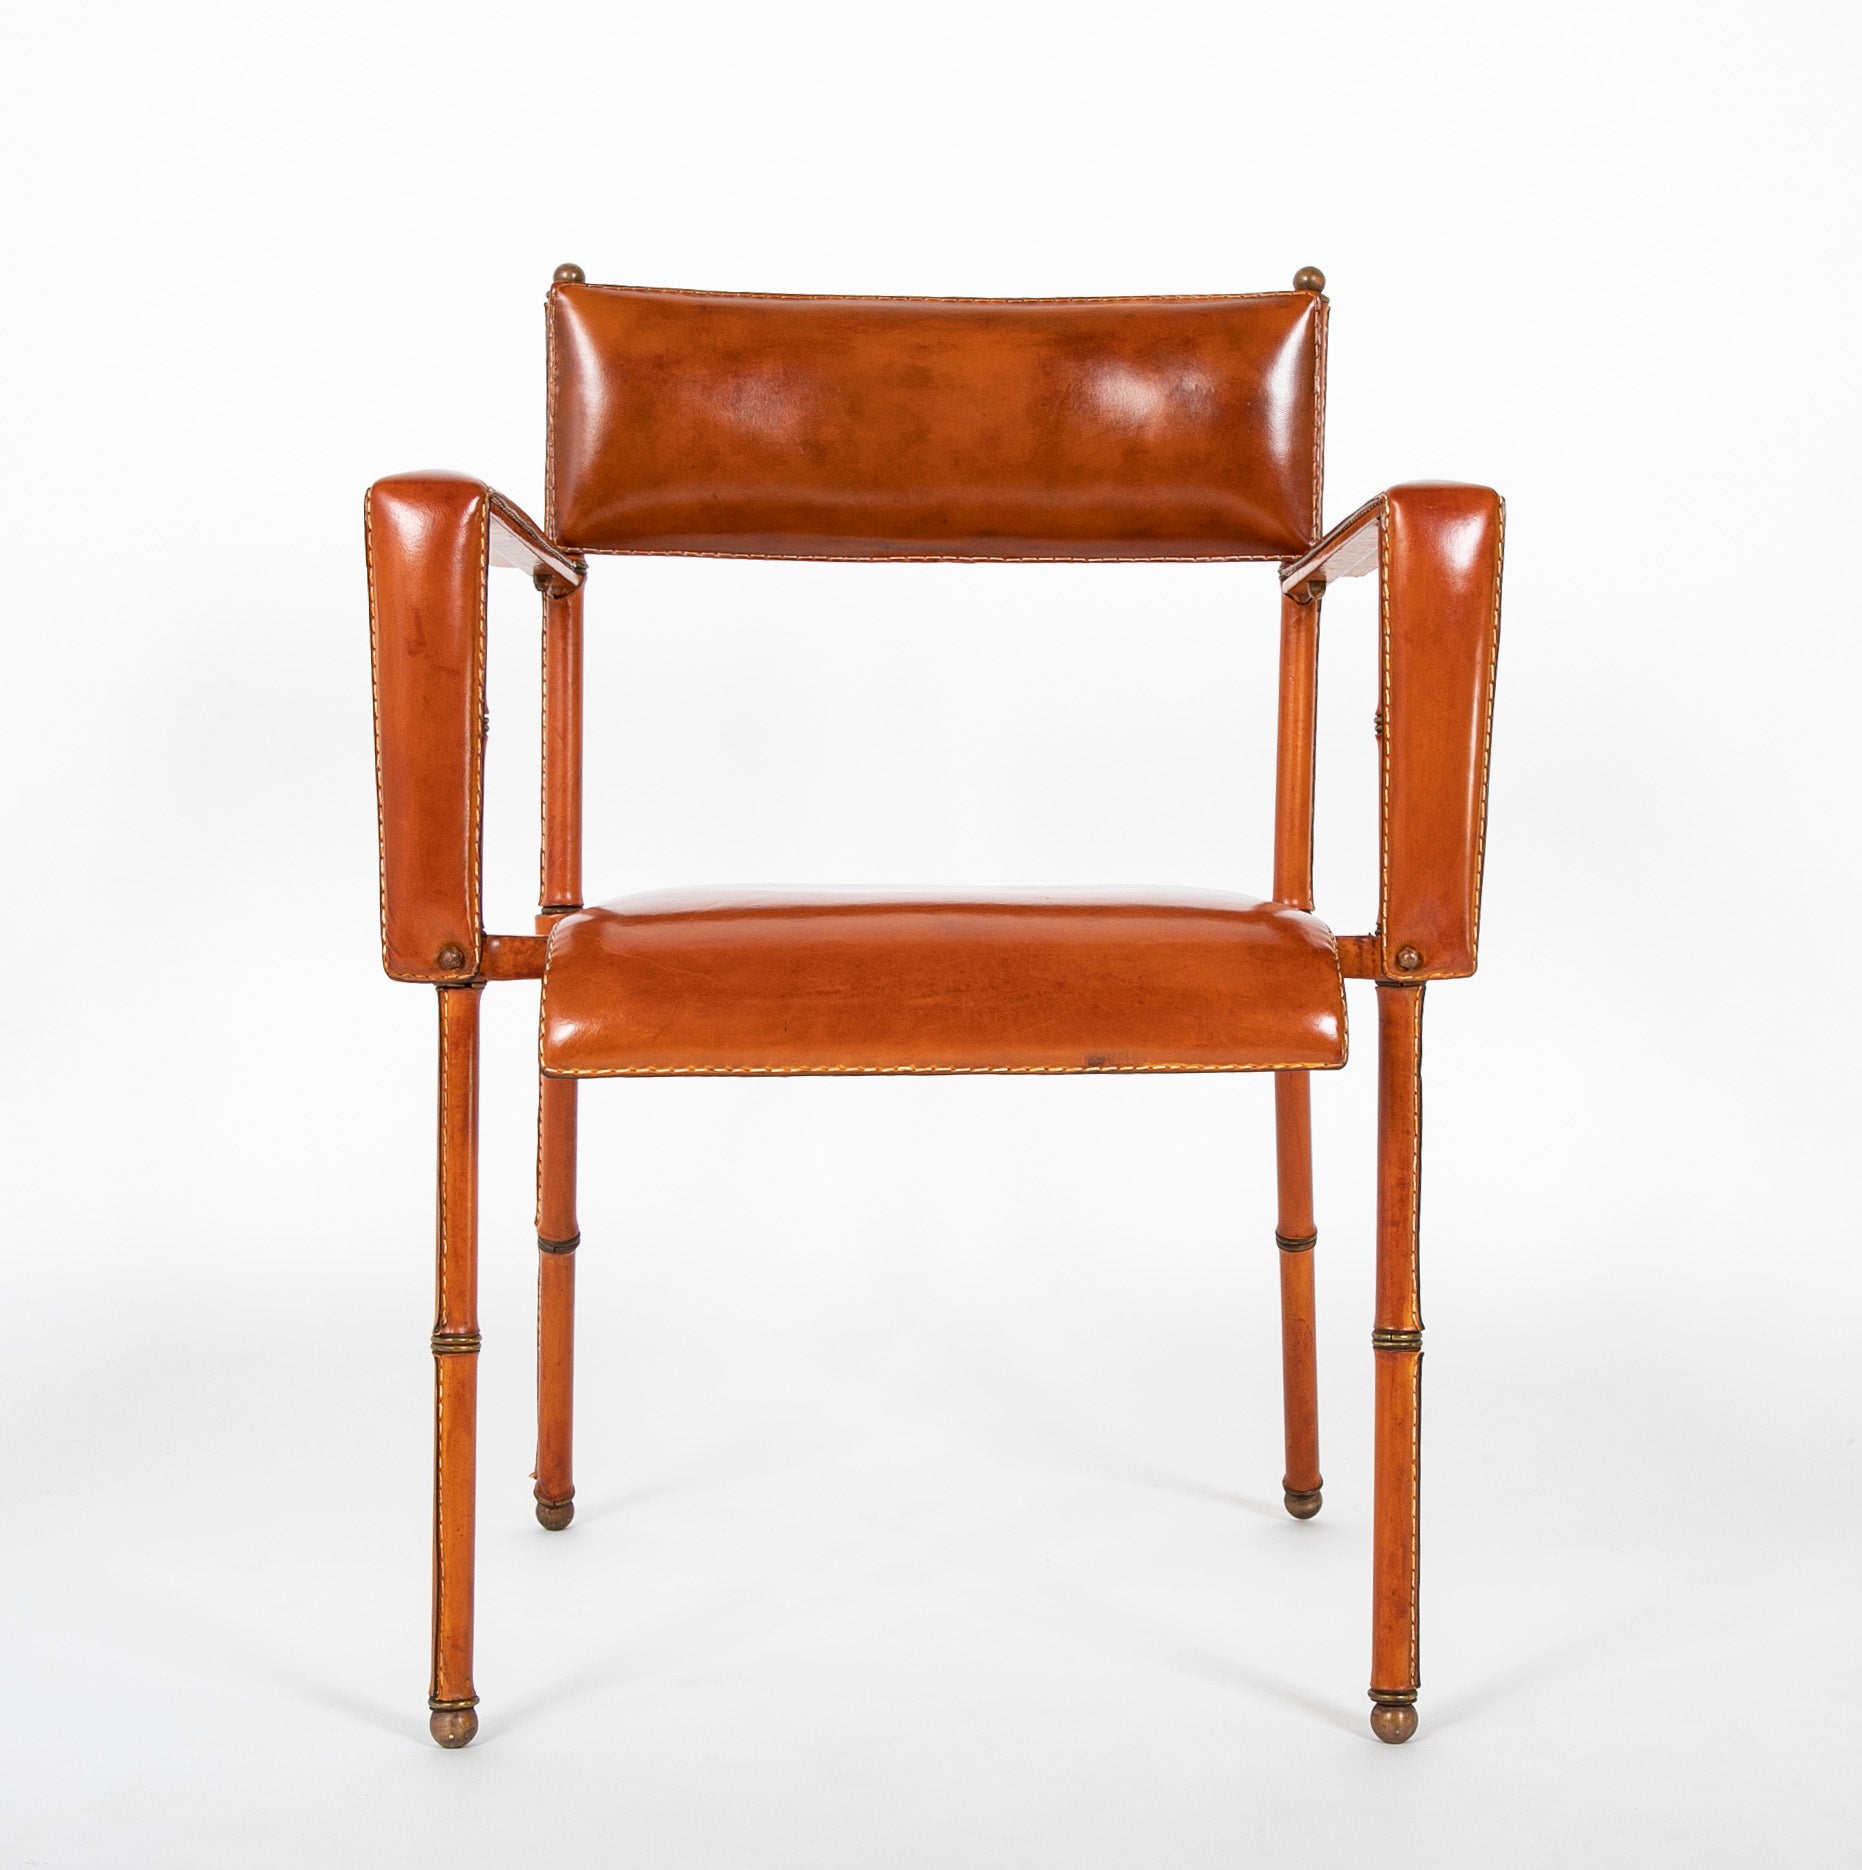 Jacques Adnet Leather Wrapped Chair Documented in the Definitive Catalog